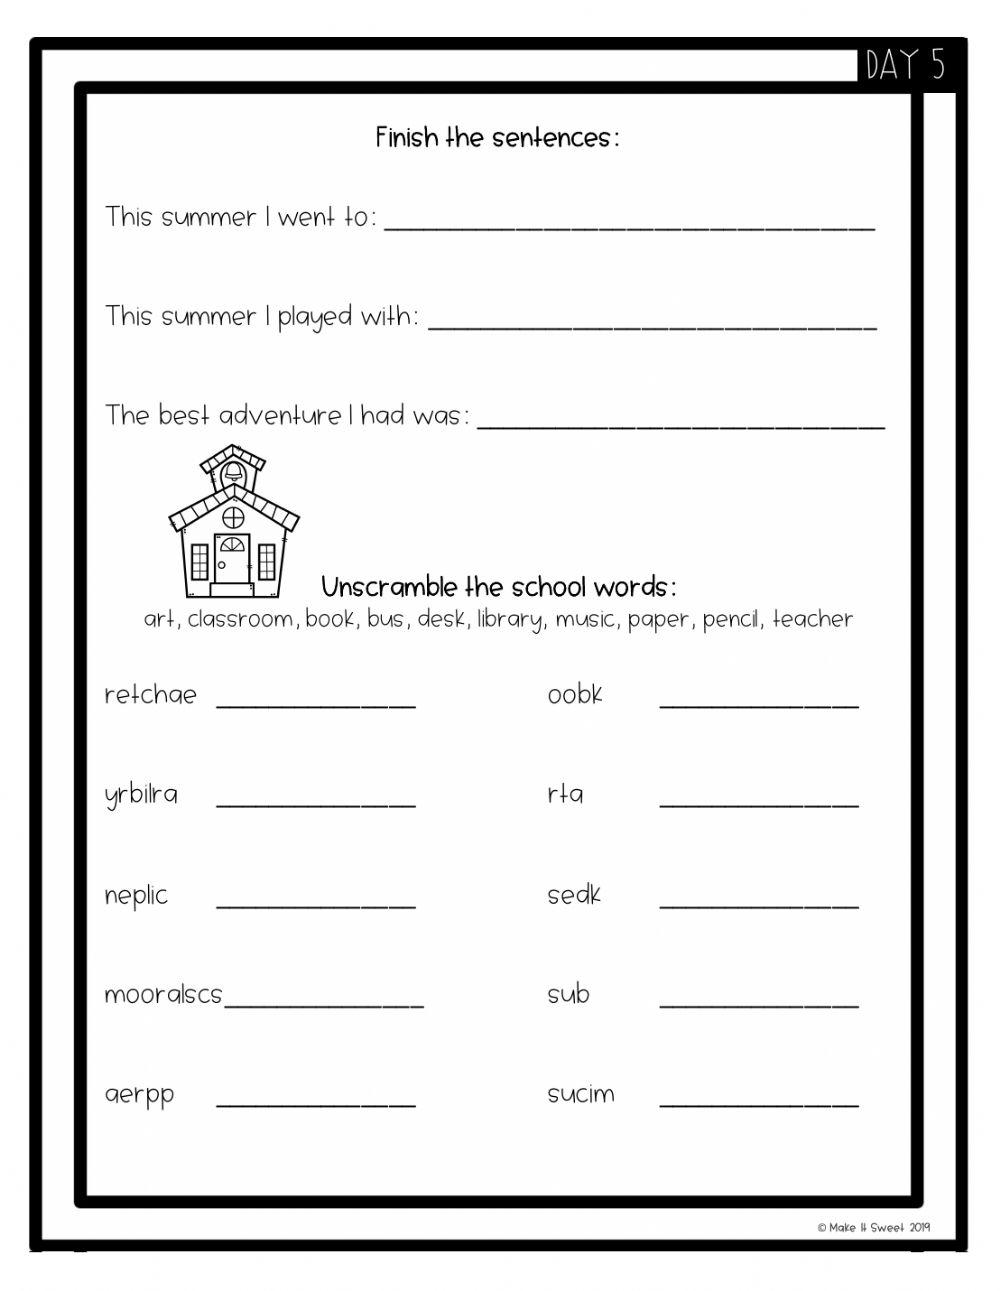 First day Worksheet